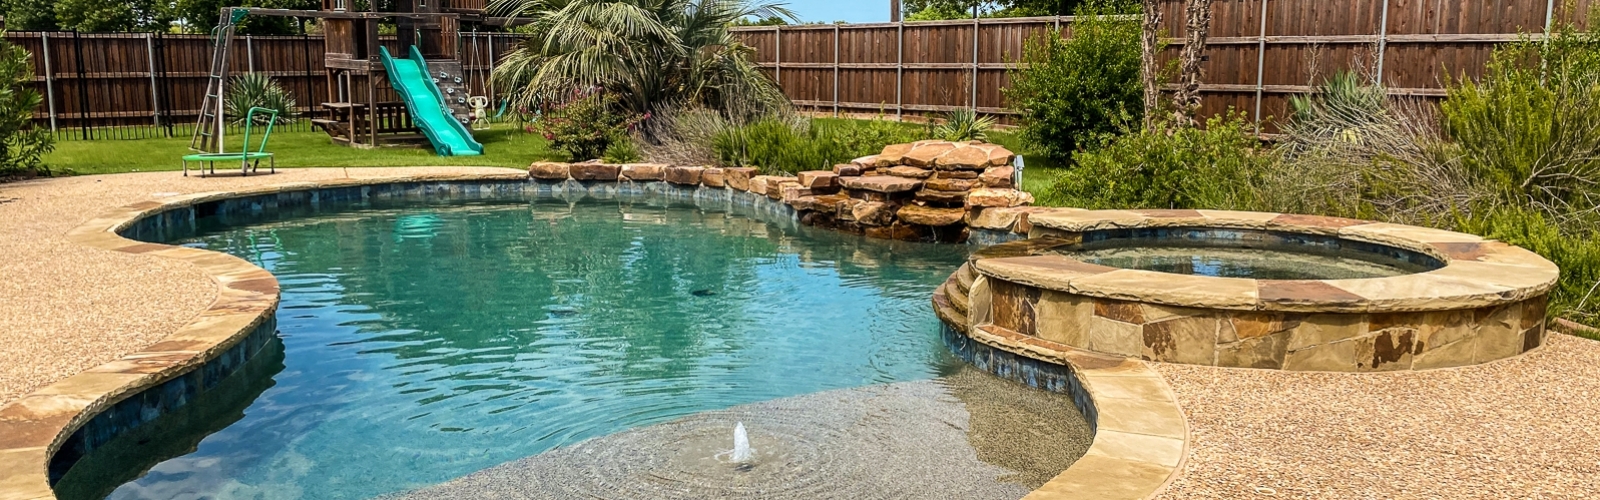 Texas Fast Pool and Spa